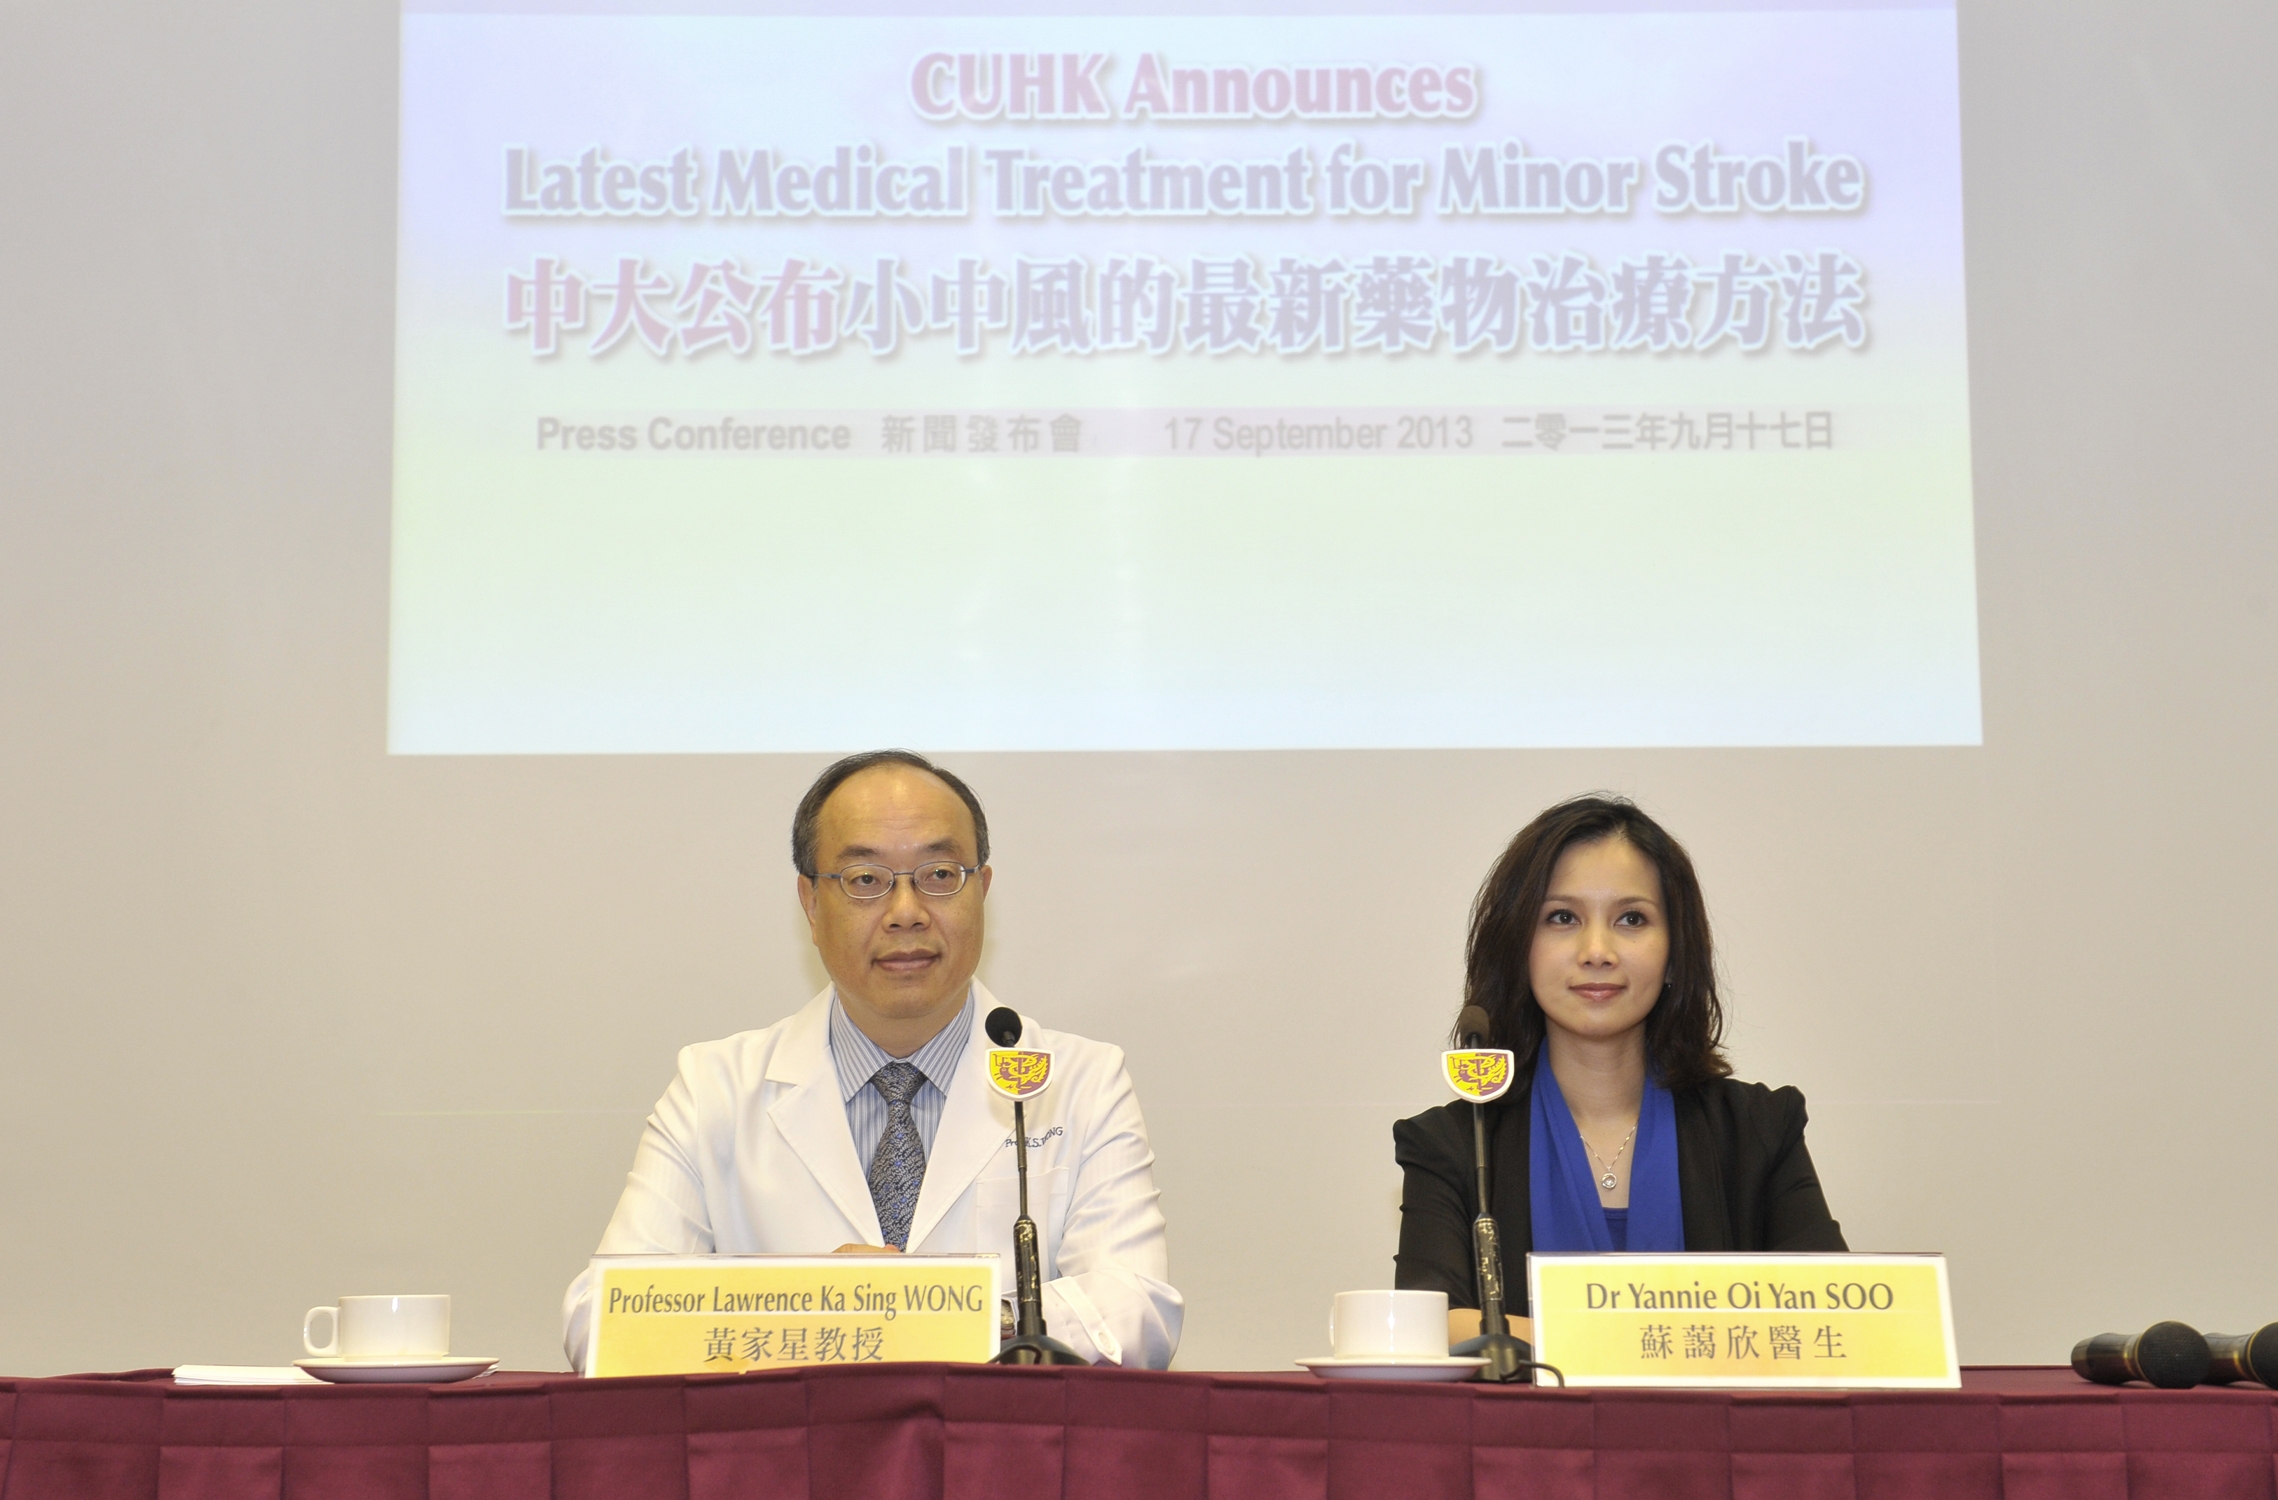 (From left) Prof. Lawrence Ka Sing WONG, Mok Hing Yiu Professor of Medicine, Chief of Neurology and Dr Yannie Oi Yan SOO, Assistant Professor (Honorary), Department of Medicine and Therapeutics, present their recent research findings on latest medical treatment for minor stroke